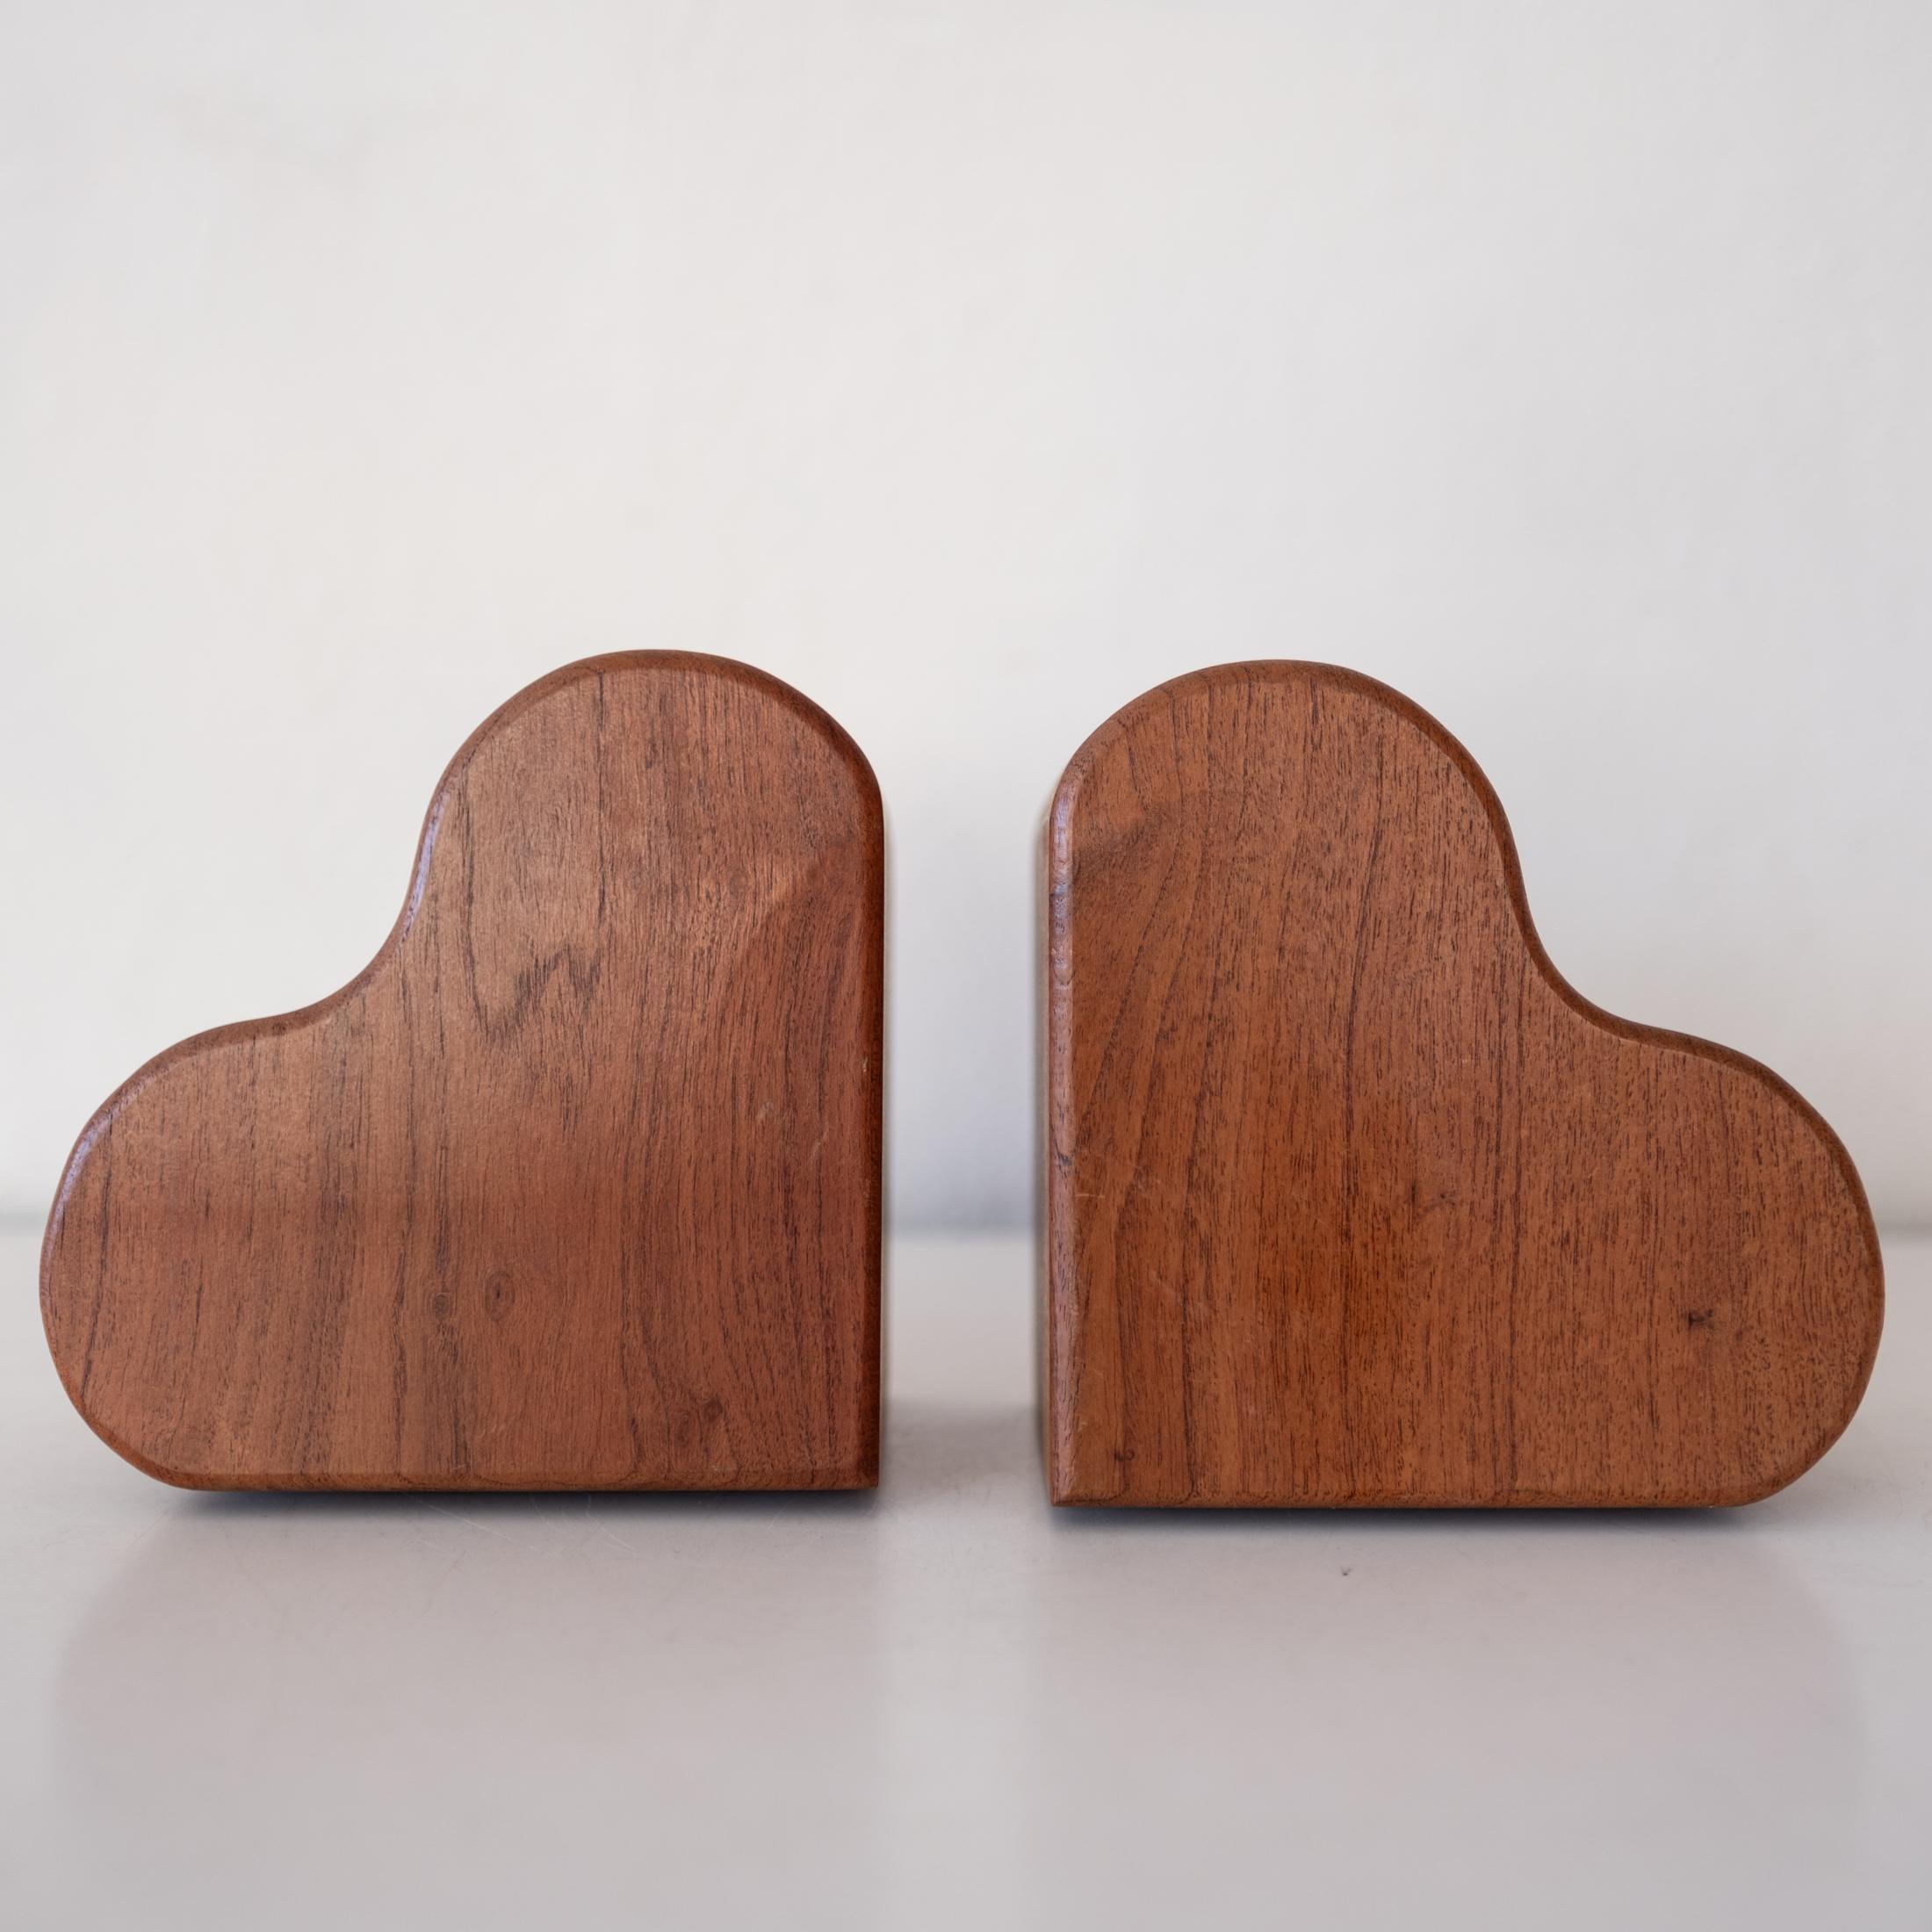 Late 20th Century Studio Crafted Wood Heart Bookends  For Sale